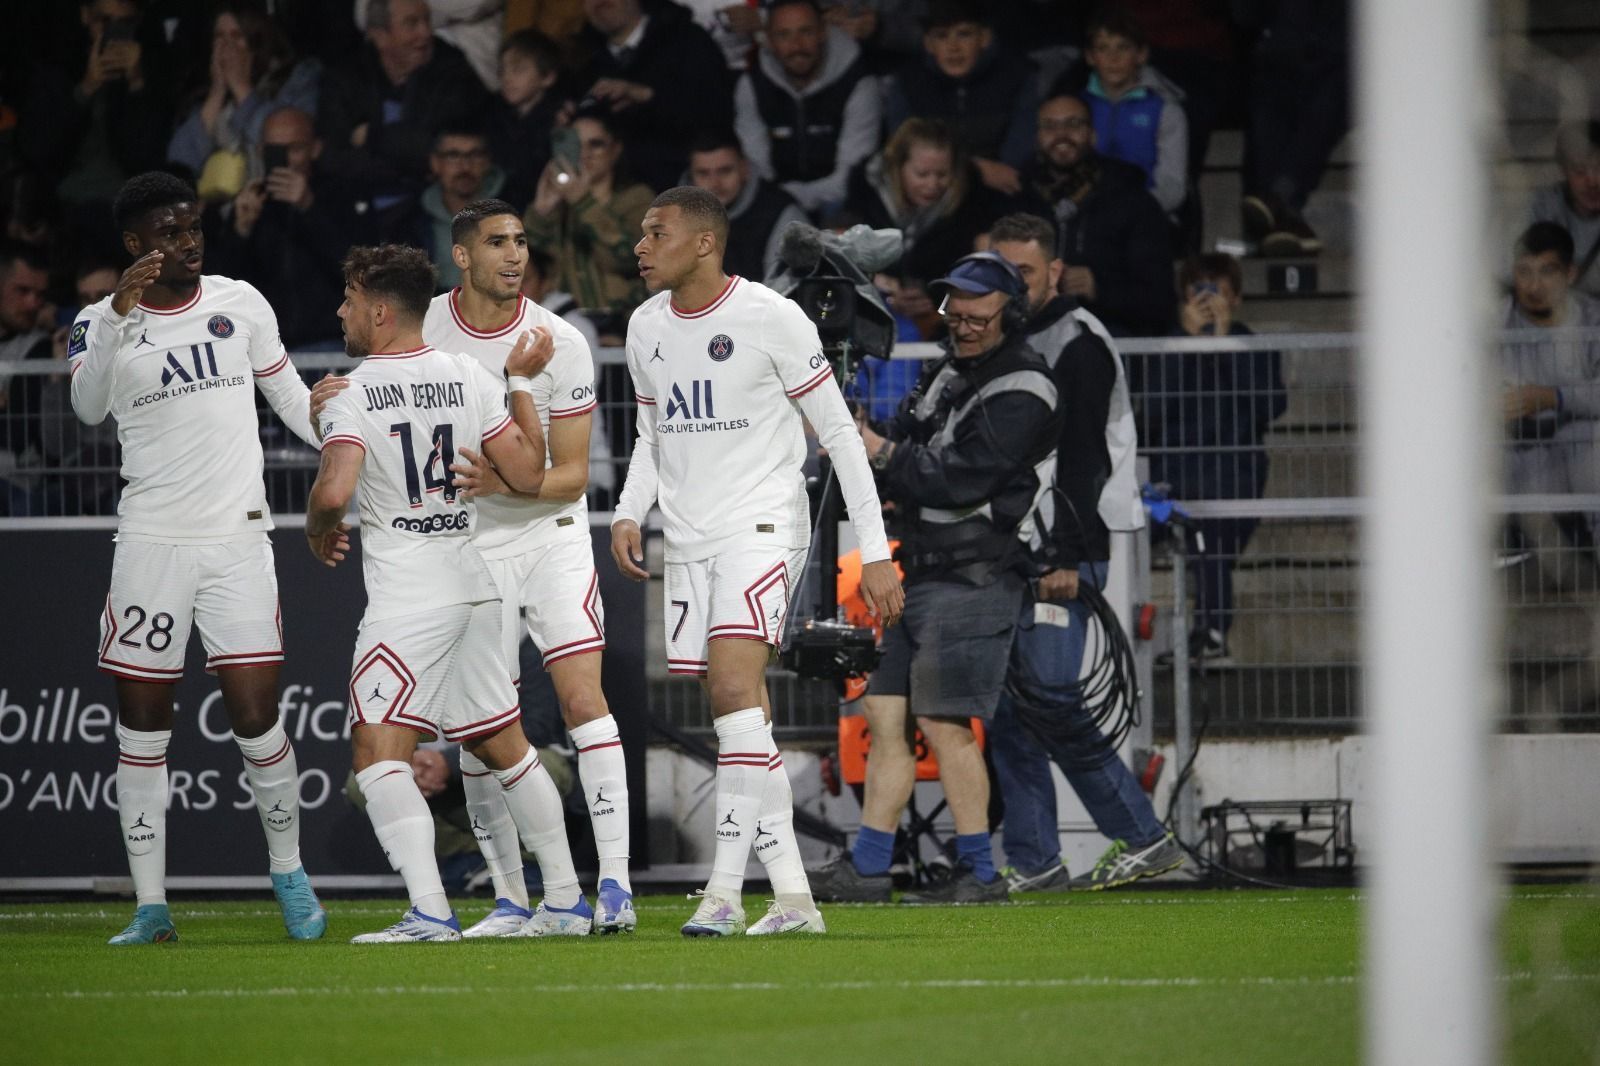 PSG maintained their 15-point lead over Marseille with a win against Angers